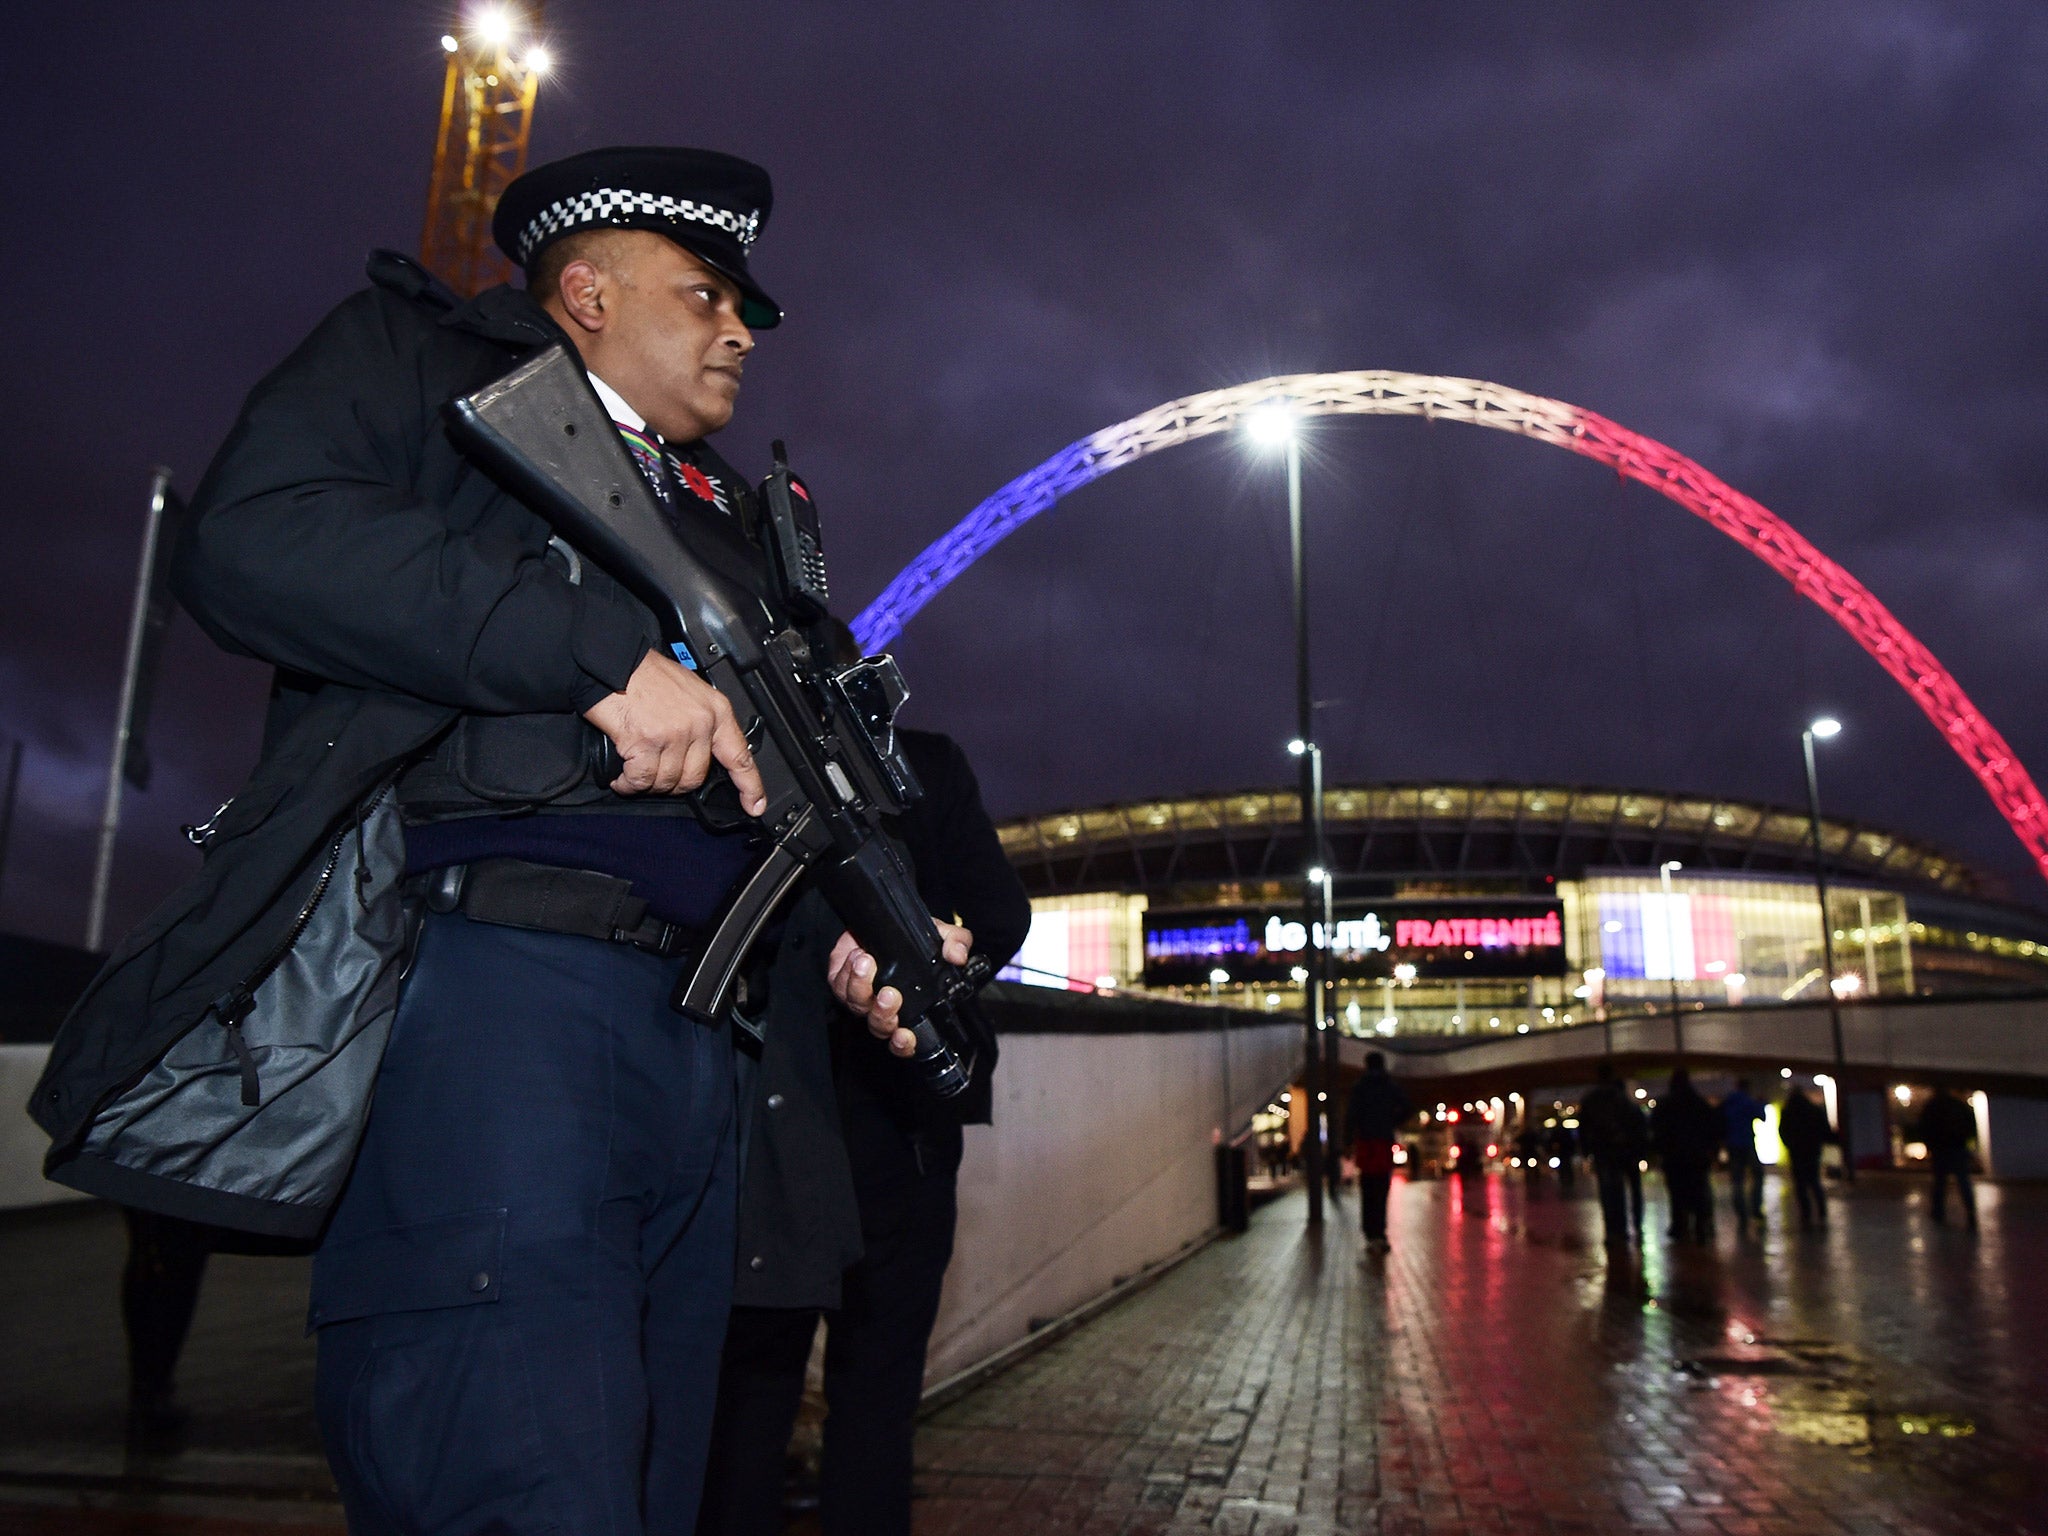 The number of armed police officers in London has fallen by 21 per cent since 2010